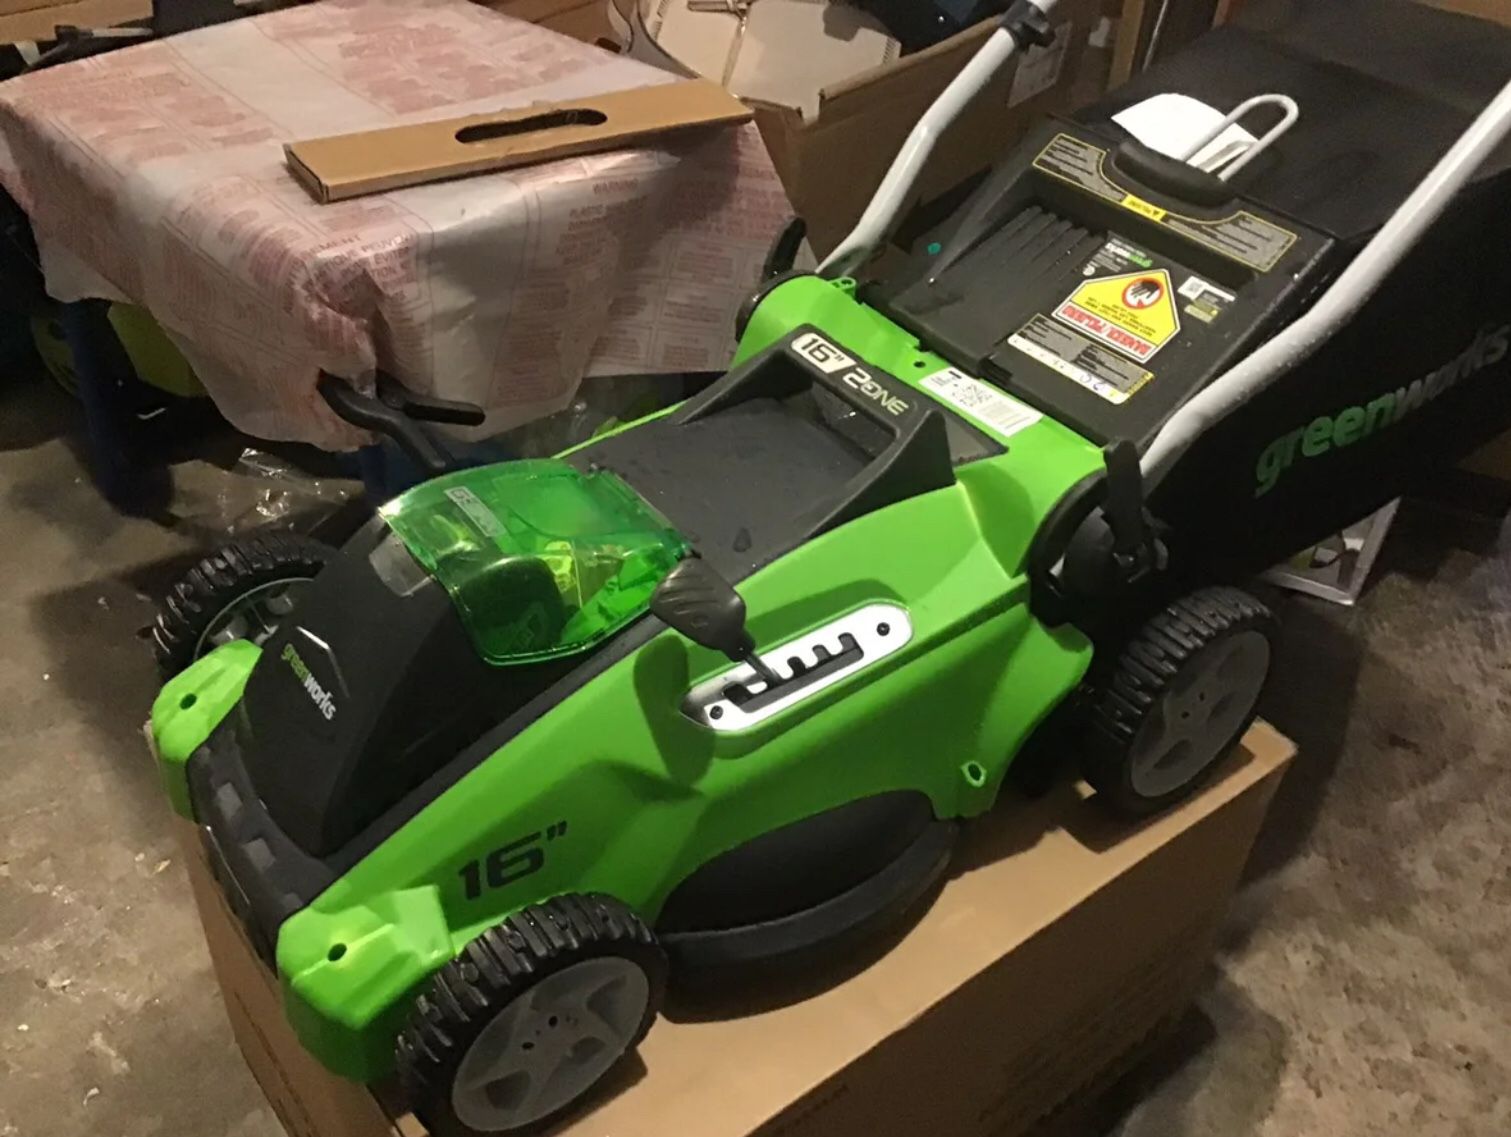 Greenworks 40 volt 16” lawn mower new never used the original box comes with accessories 1 battery & 1 charger new works great